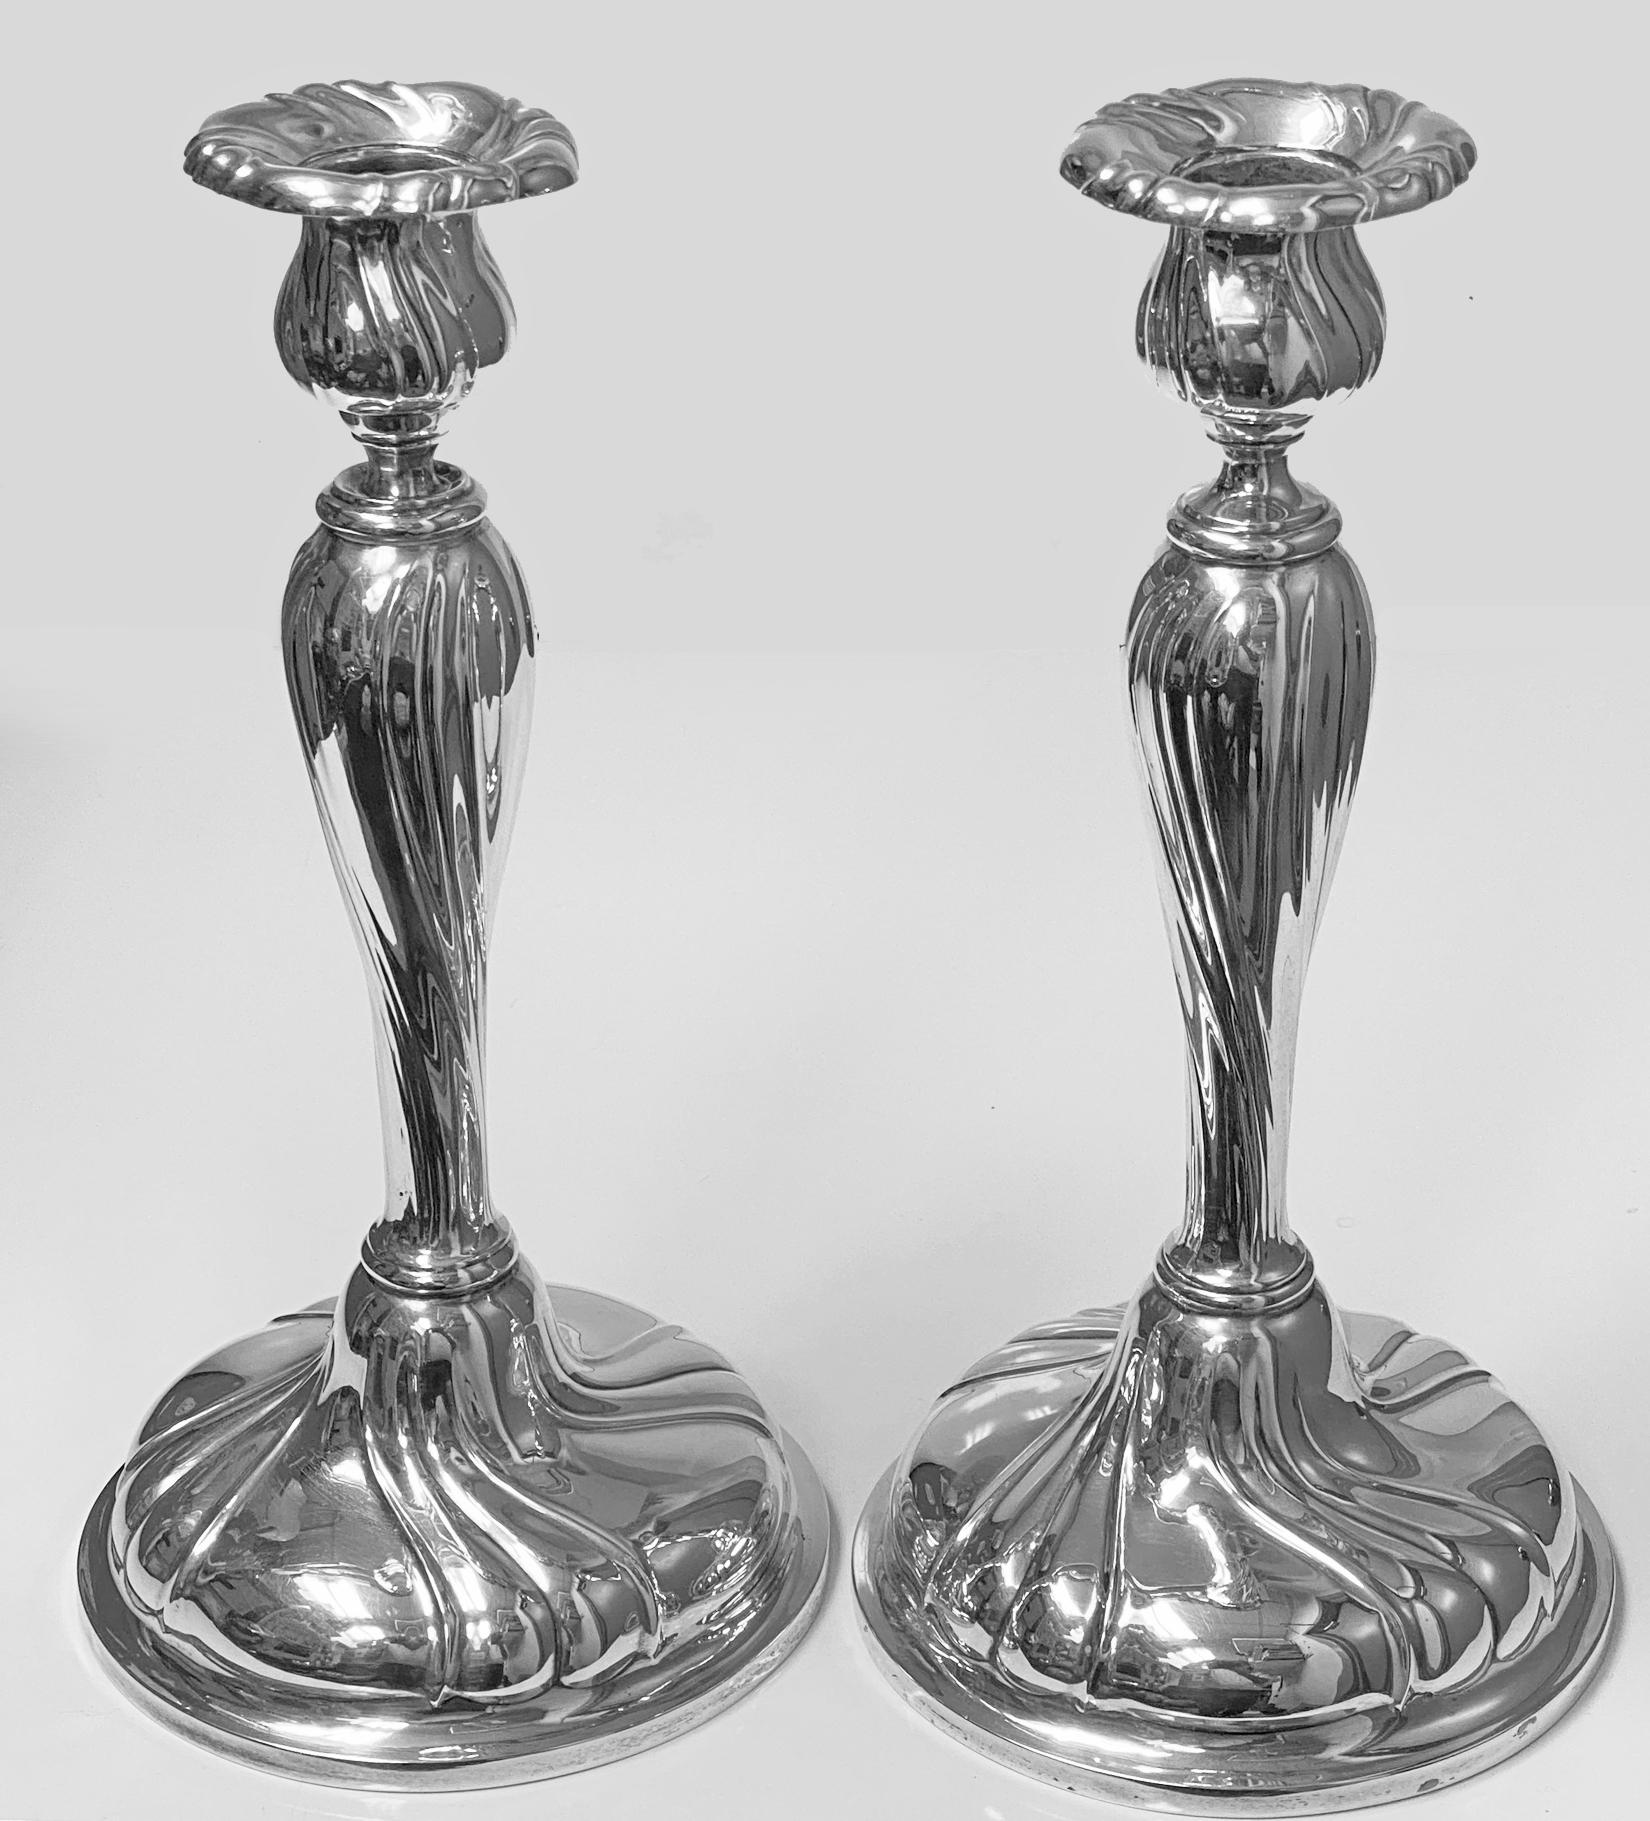 Large silver candlesticks Czechoslovakia, circa 1930. Each on circular domed swirl bases, tapered vase bellied stems supporting swirl surround sockets and nozzles conforming in design. Makers mark FB and mark for 800 std silver Czechoslovakia